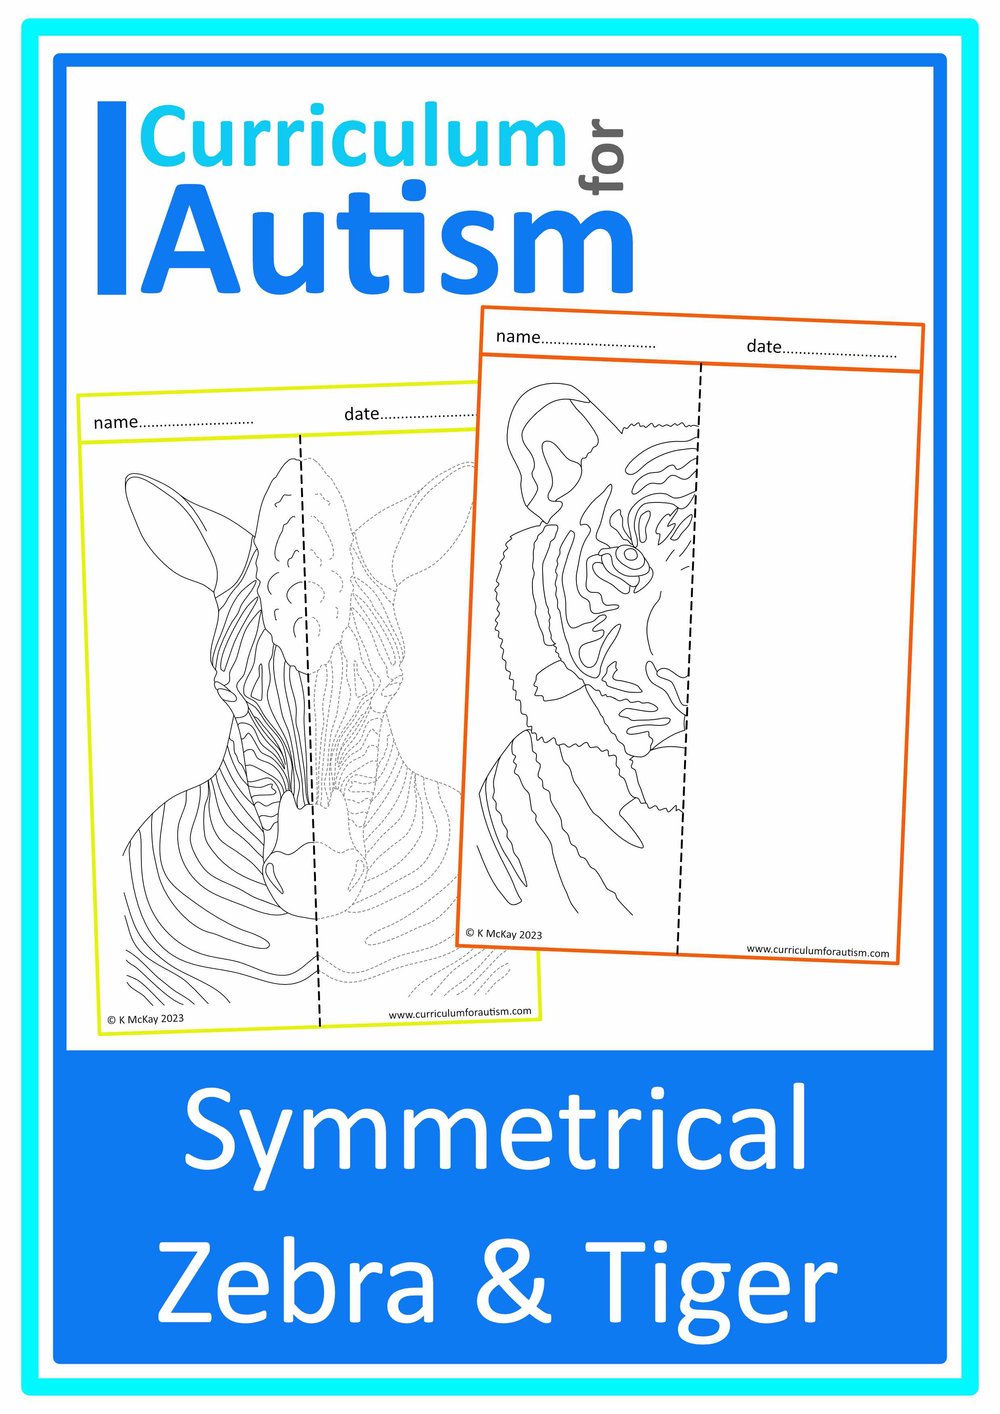 Symmetrical drawing art lessons zebra tiger differentiated worksheets special education inclusion â curriculum for autism